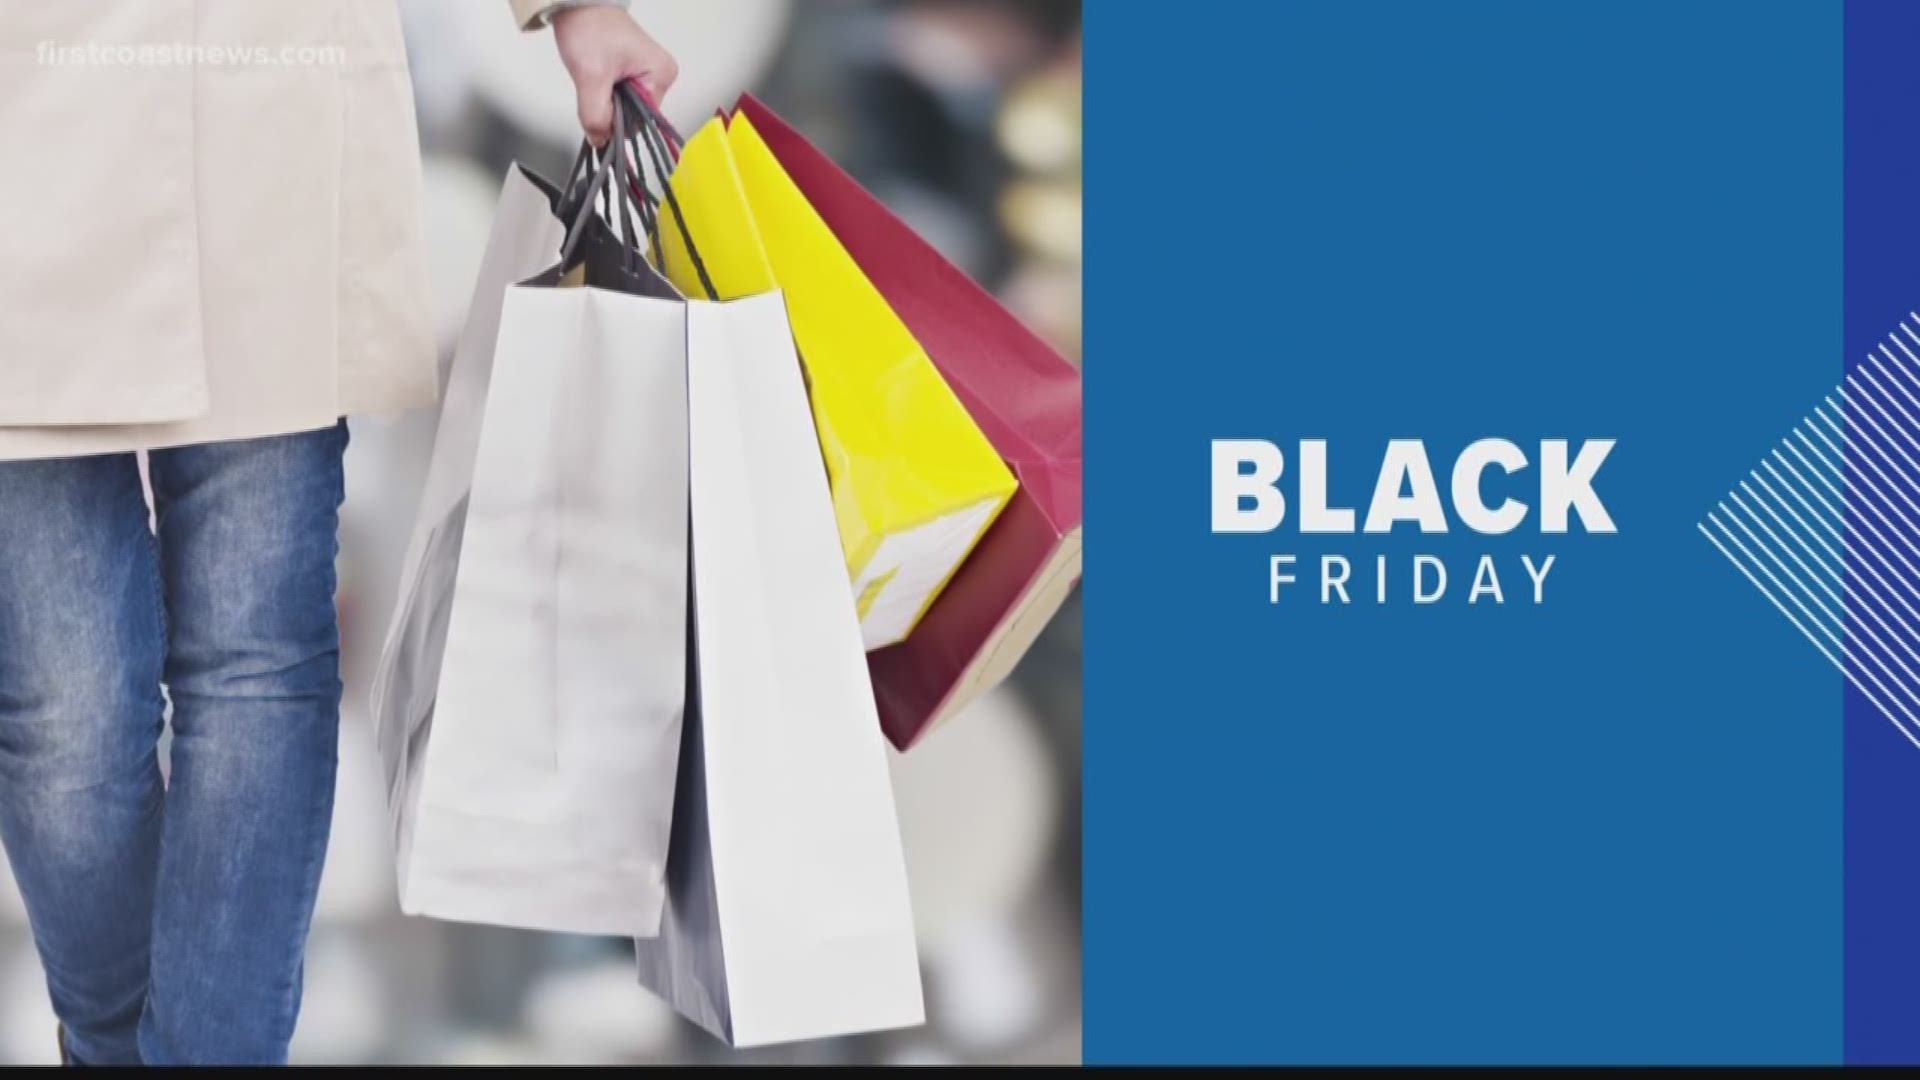 Here are some tips on how to do your Black Friday shopping on a budget.